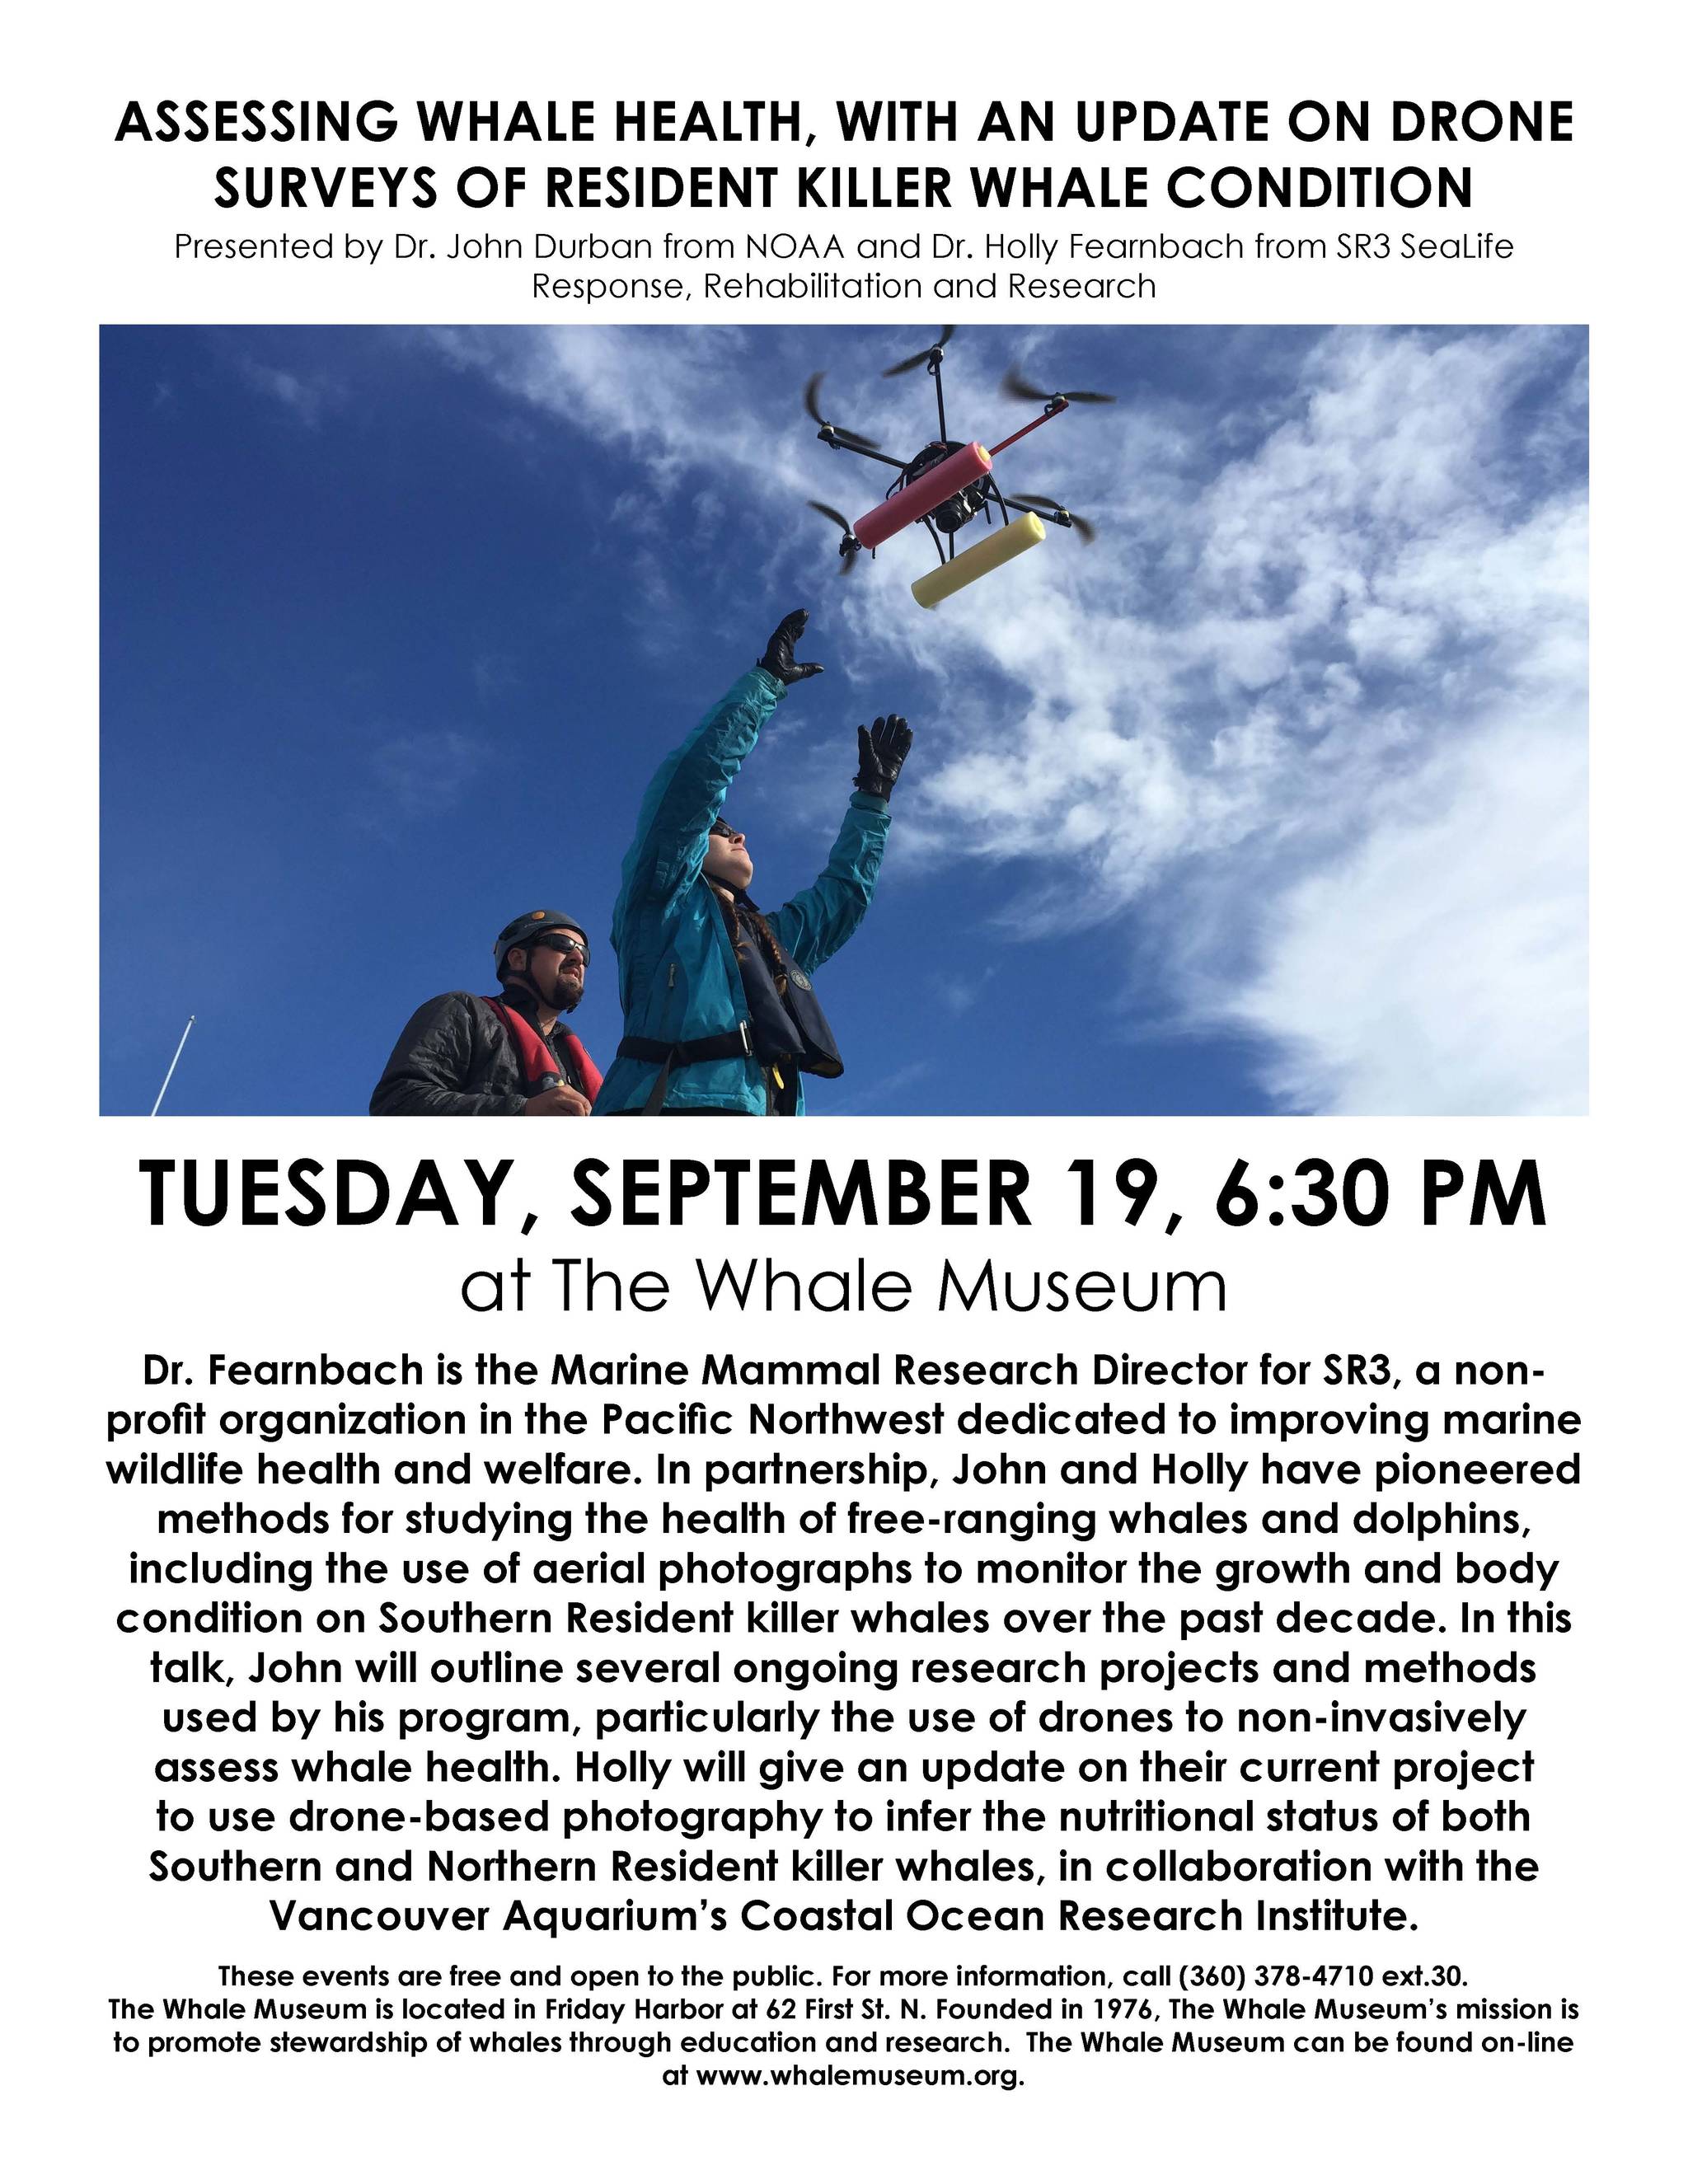 Lecture on drone surveys on orcas at The Whale Musuem